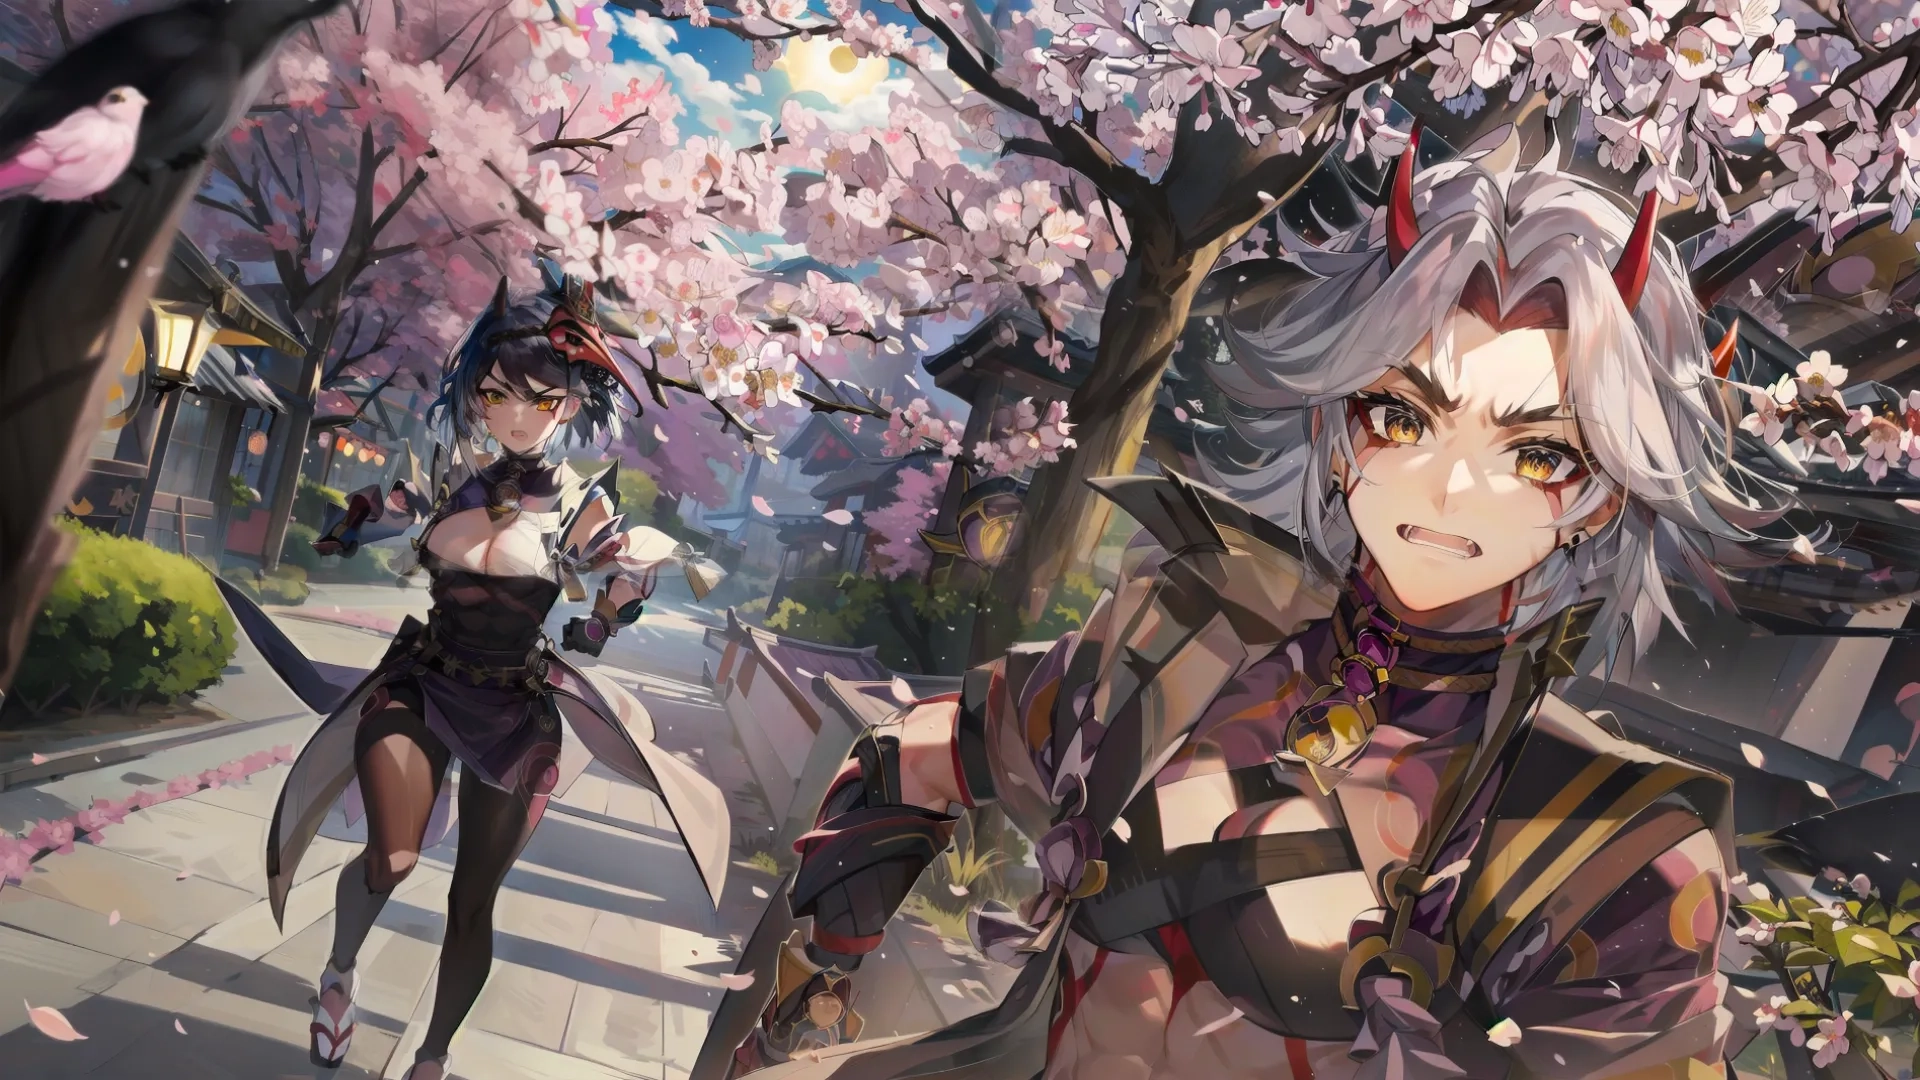 two anime - style girls walk on a city street, facing each other in blooming cherry blossoms all around them together and a woman with hair
